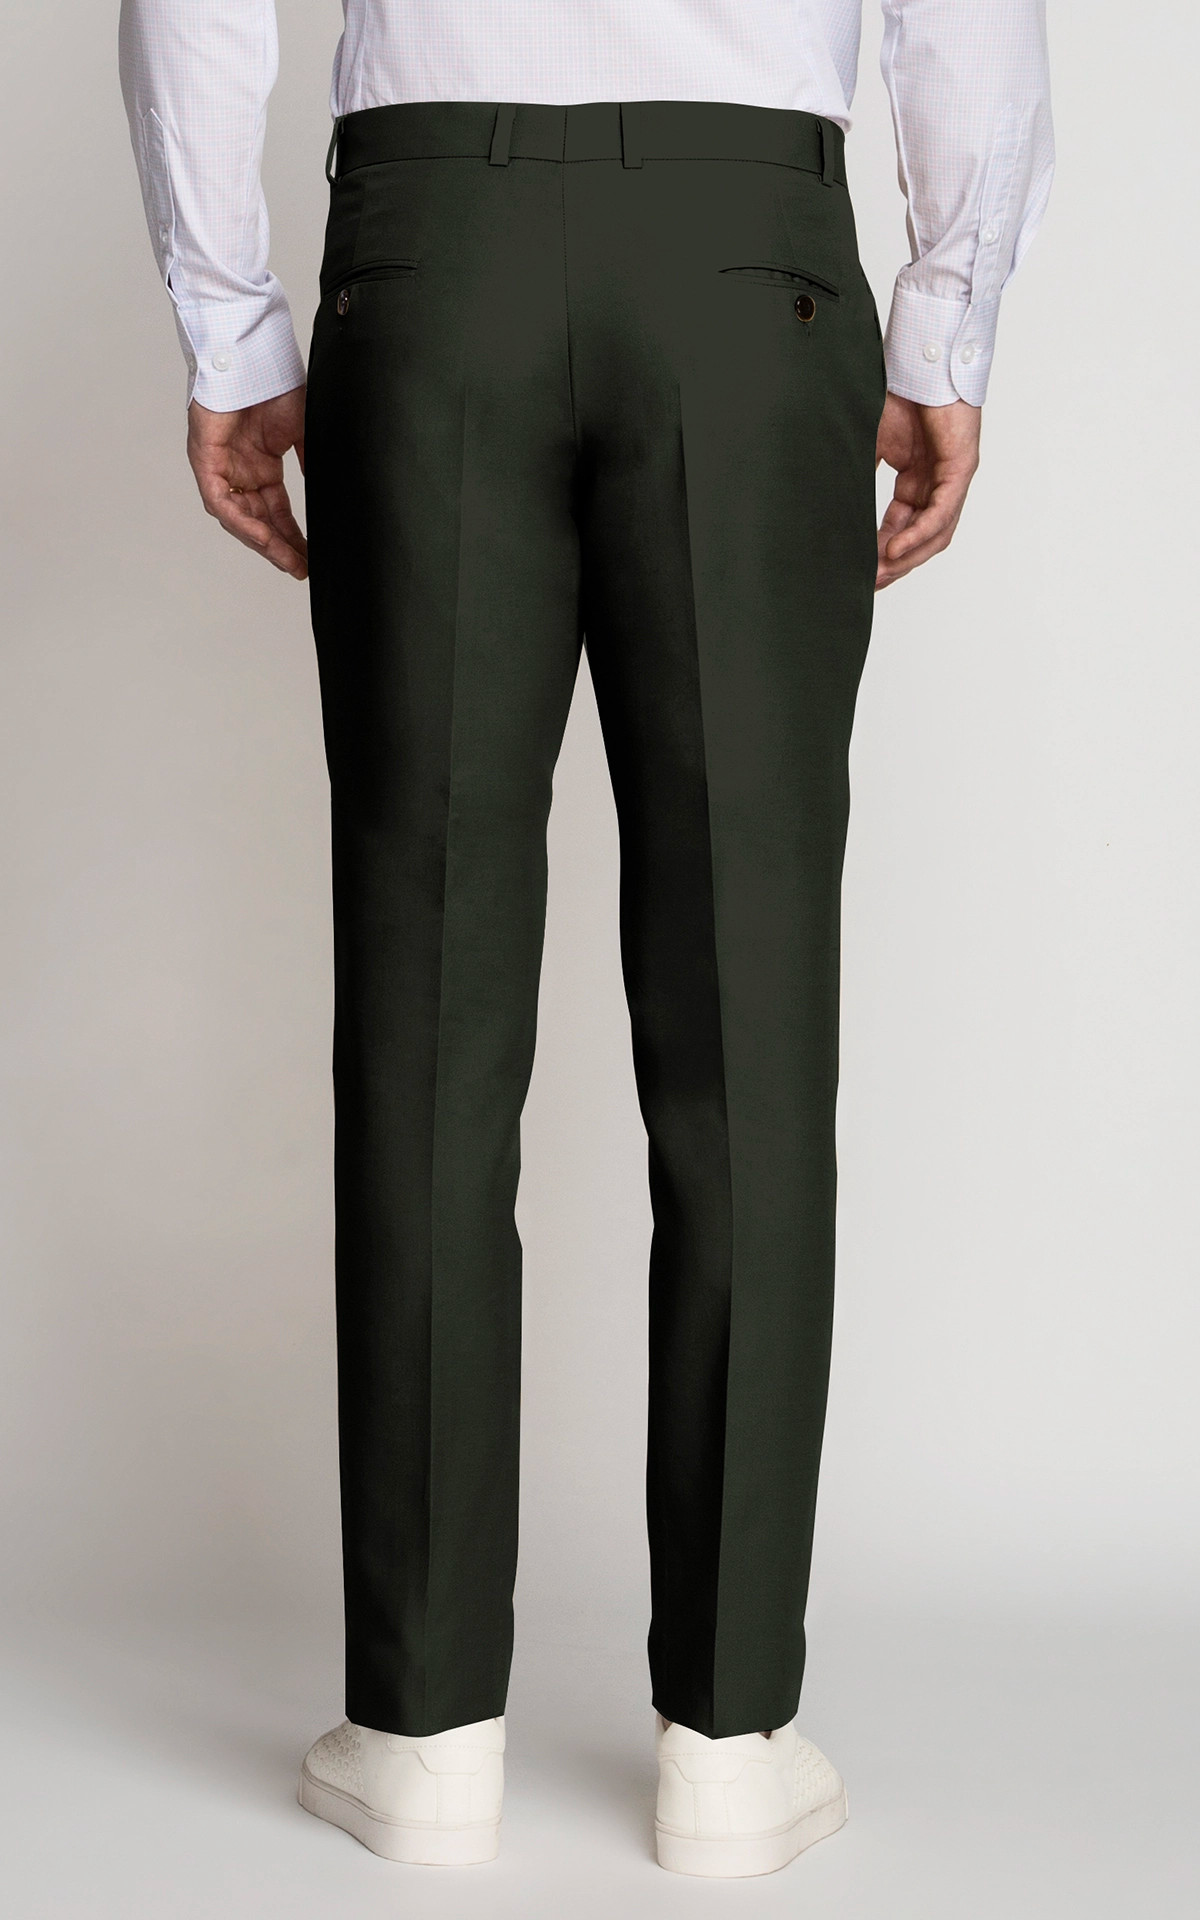 Women's High-waisted Paperbag Taper Trousers - Ava & Viv™ Olive Green 4x :  Target